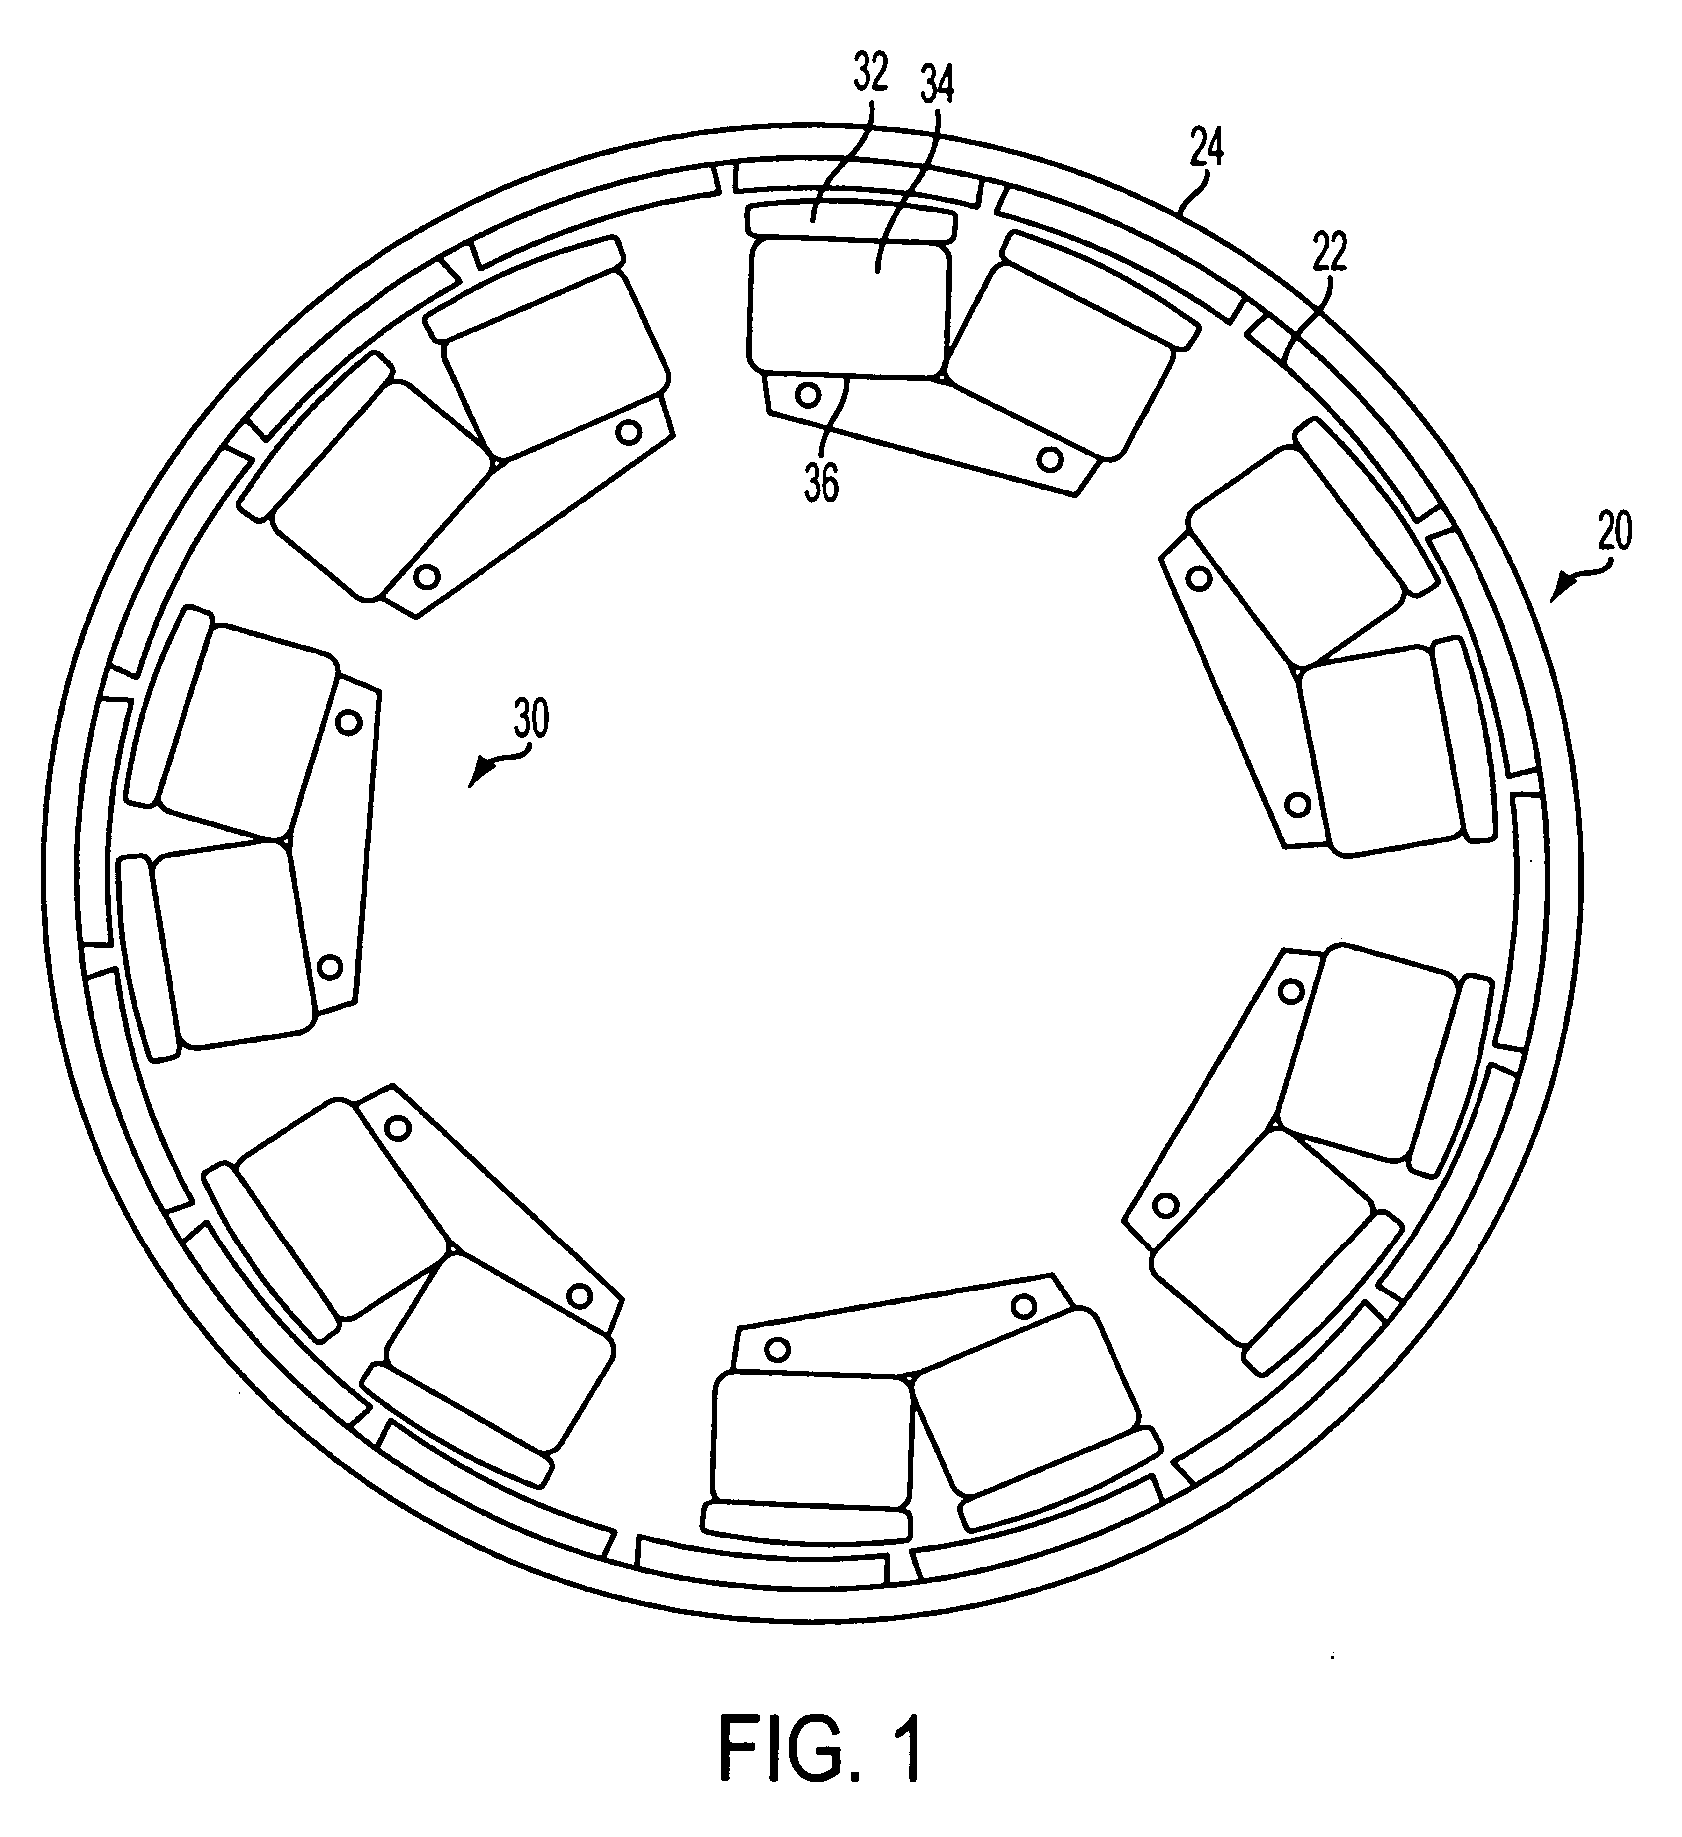 Dynamoelectric machine having heat pipes embedded in stator core